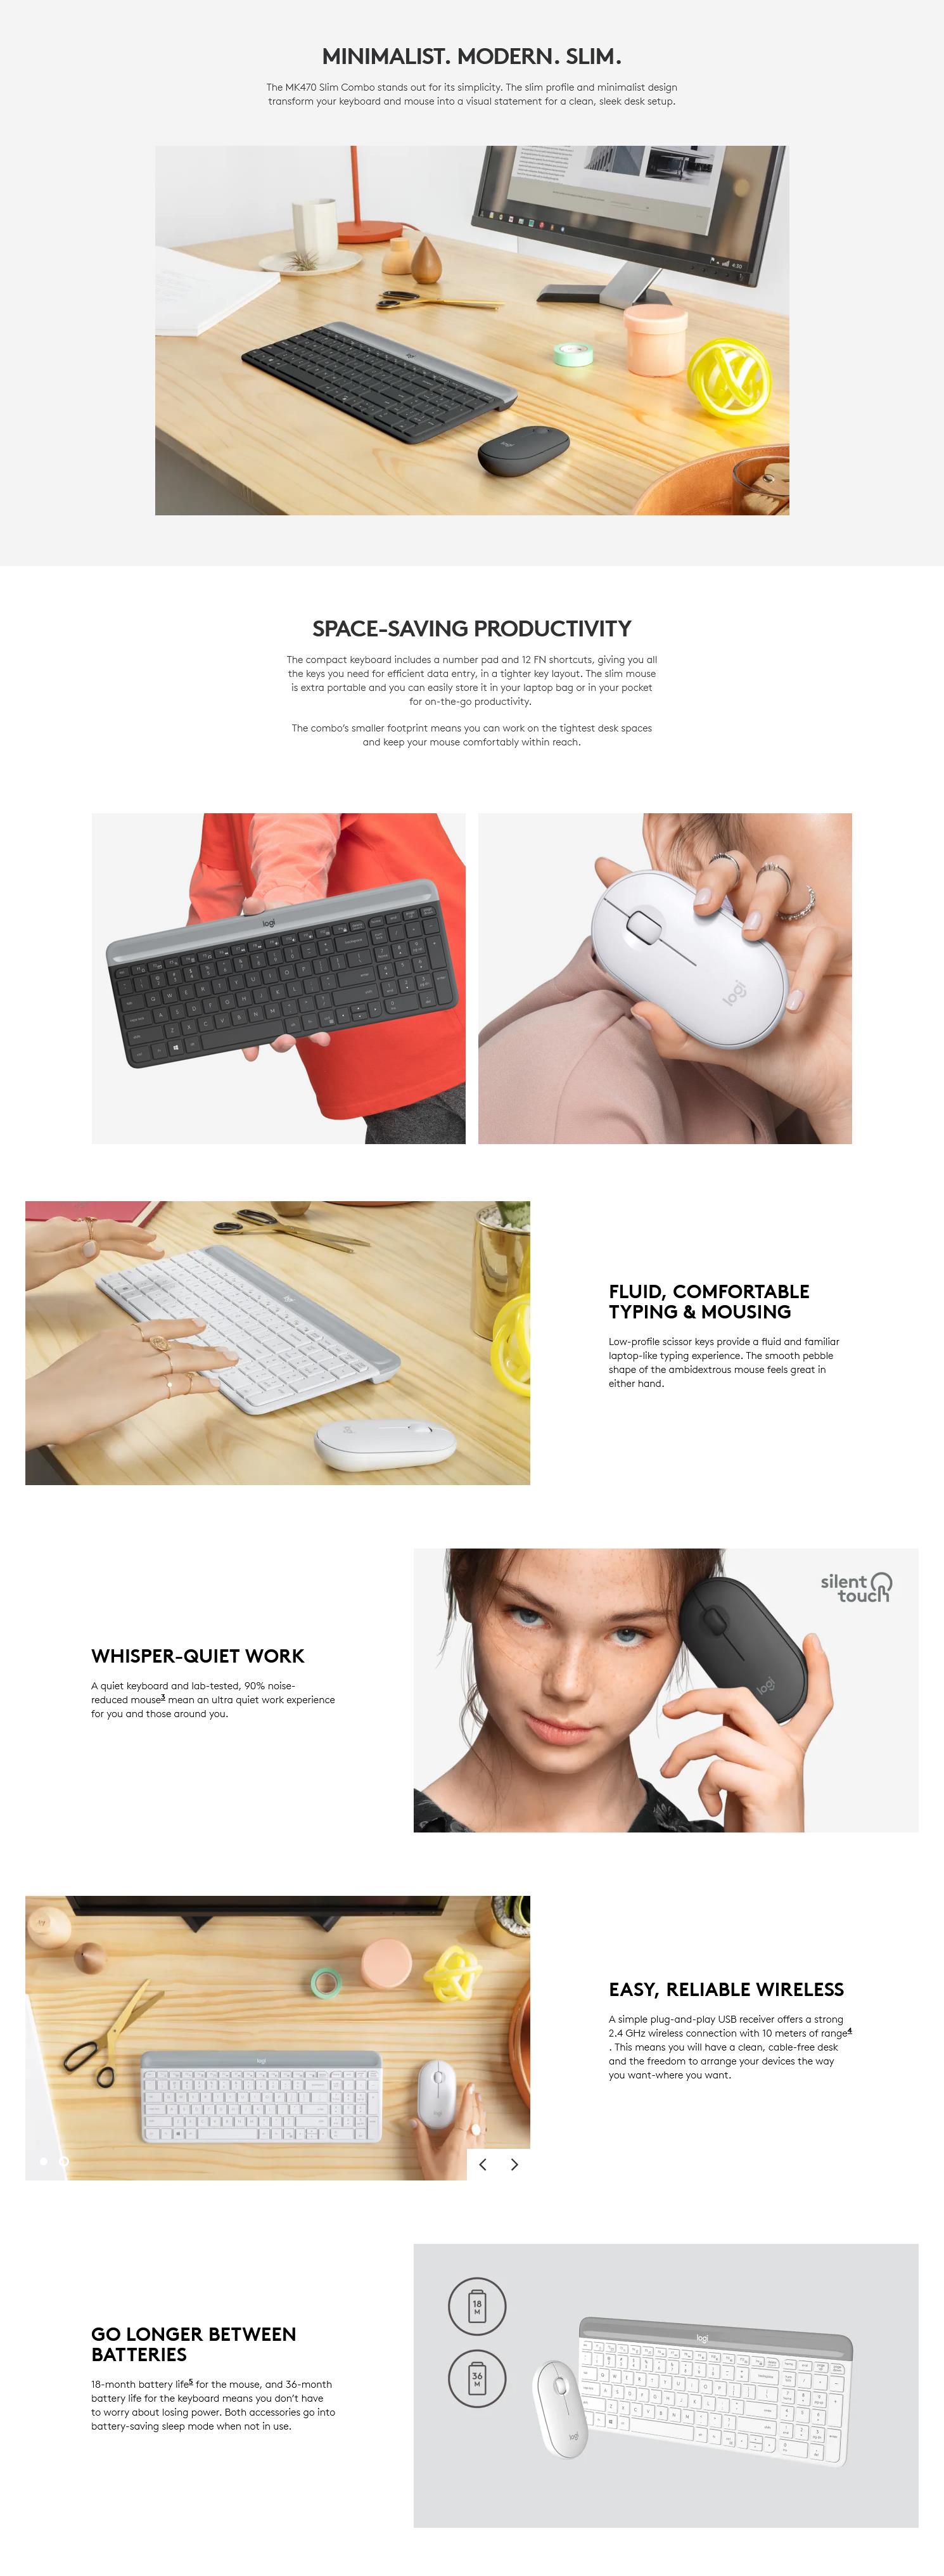 A large marketing image providing additional information about the product Logitech MK470 Slim Wireless Keyboard and Mouse - Off White - Additional alt info not provided